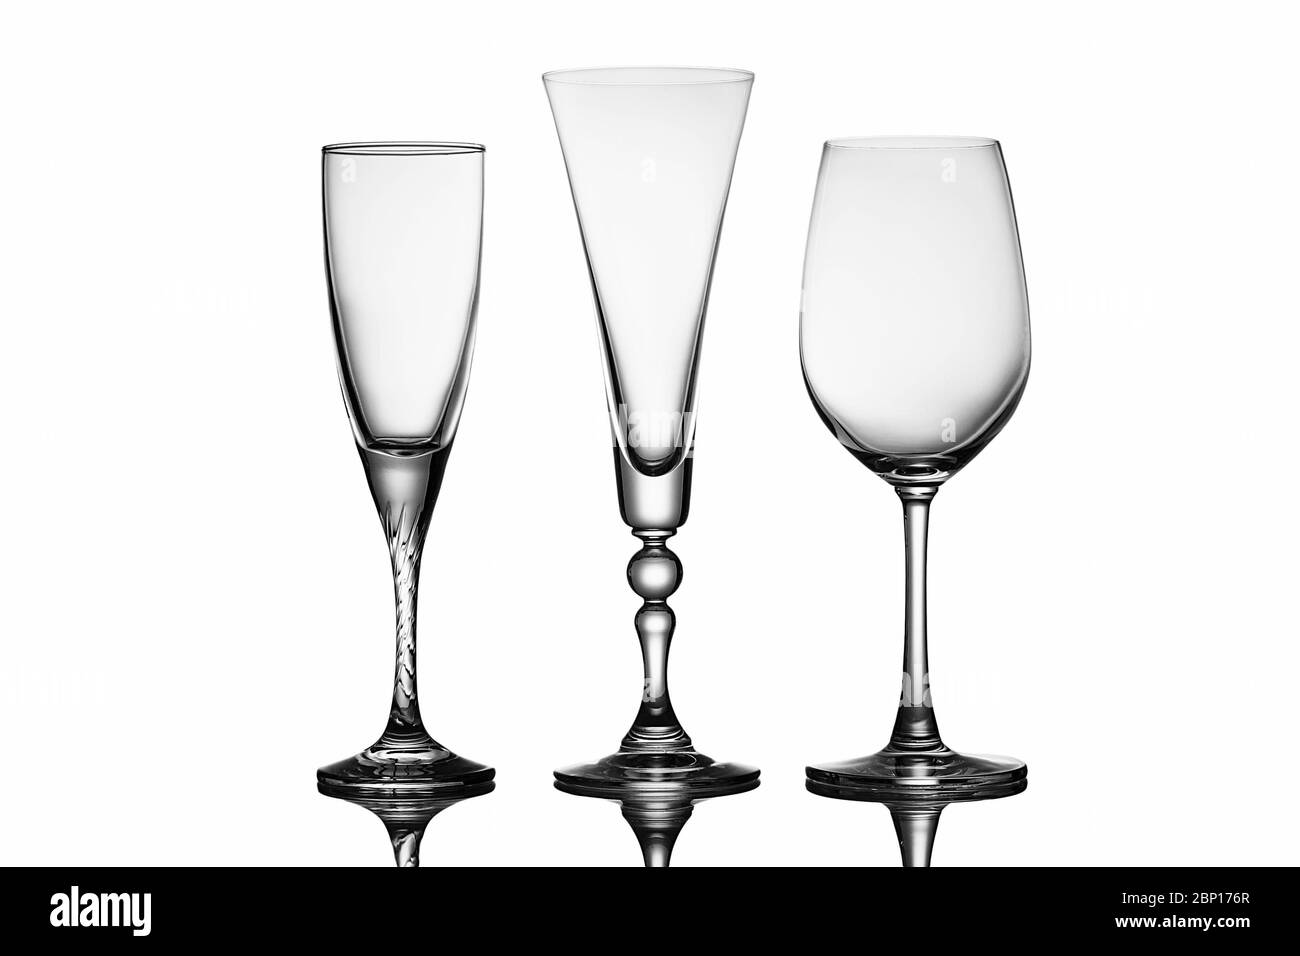 Three elegant stemmed glasses of different shapes with wineglass and champagne flutes over a reflective white background Stock Photo